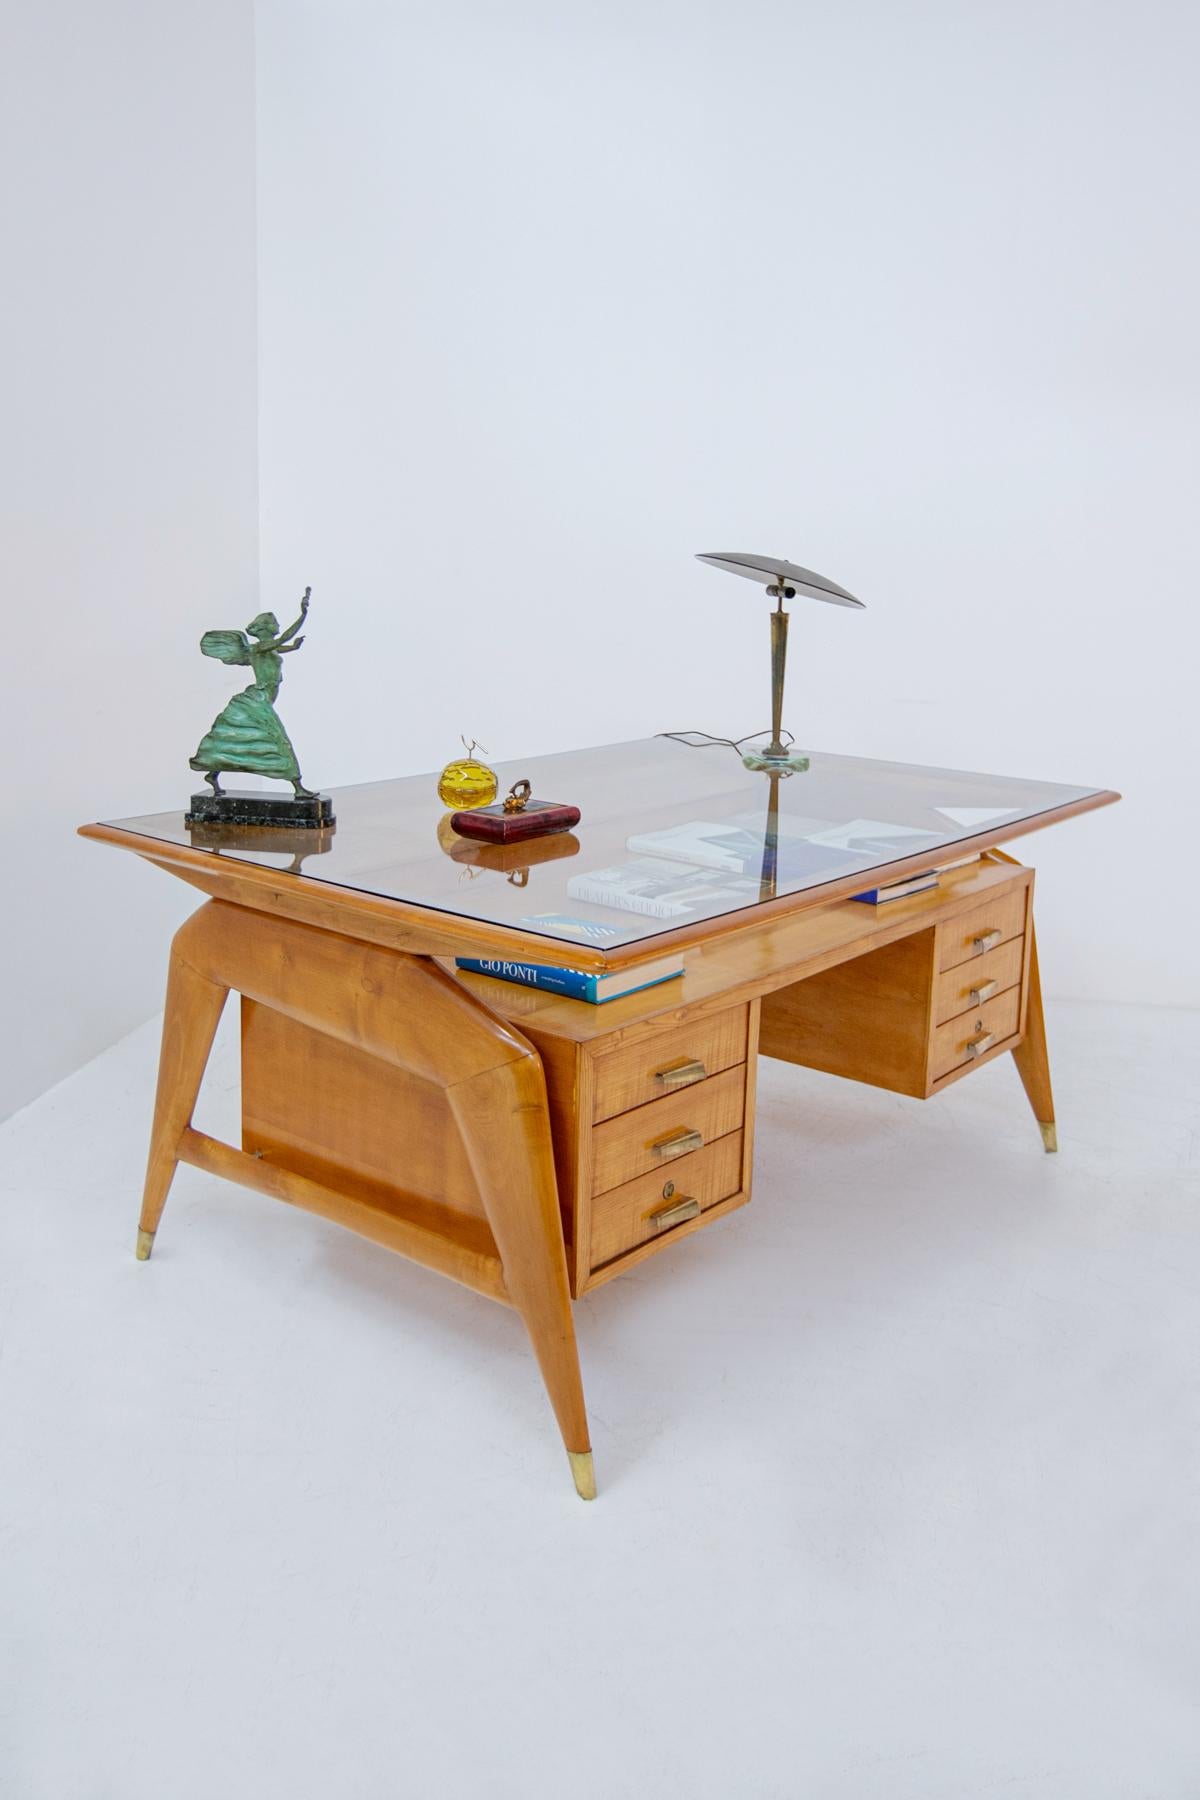 Carlo de Carli Important Desk in Wood Glass and Brass, 1950s Published 14